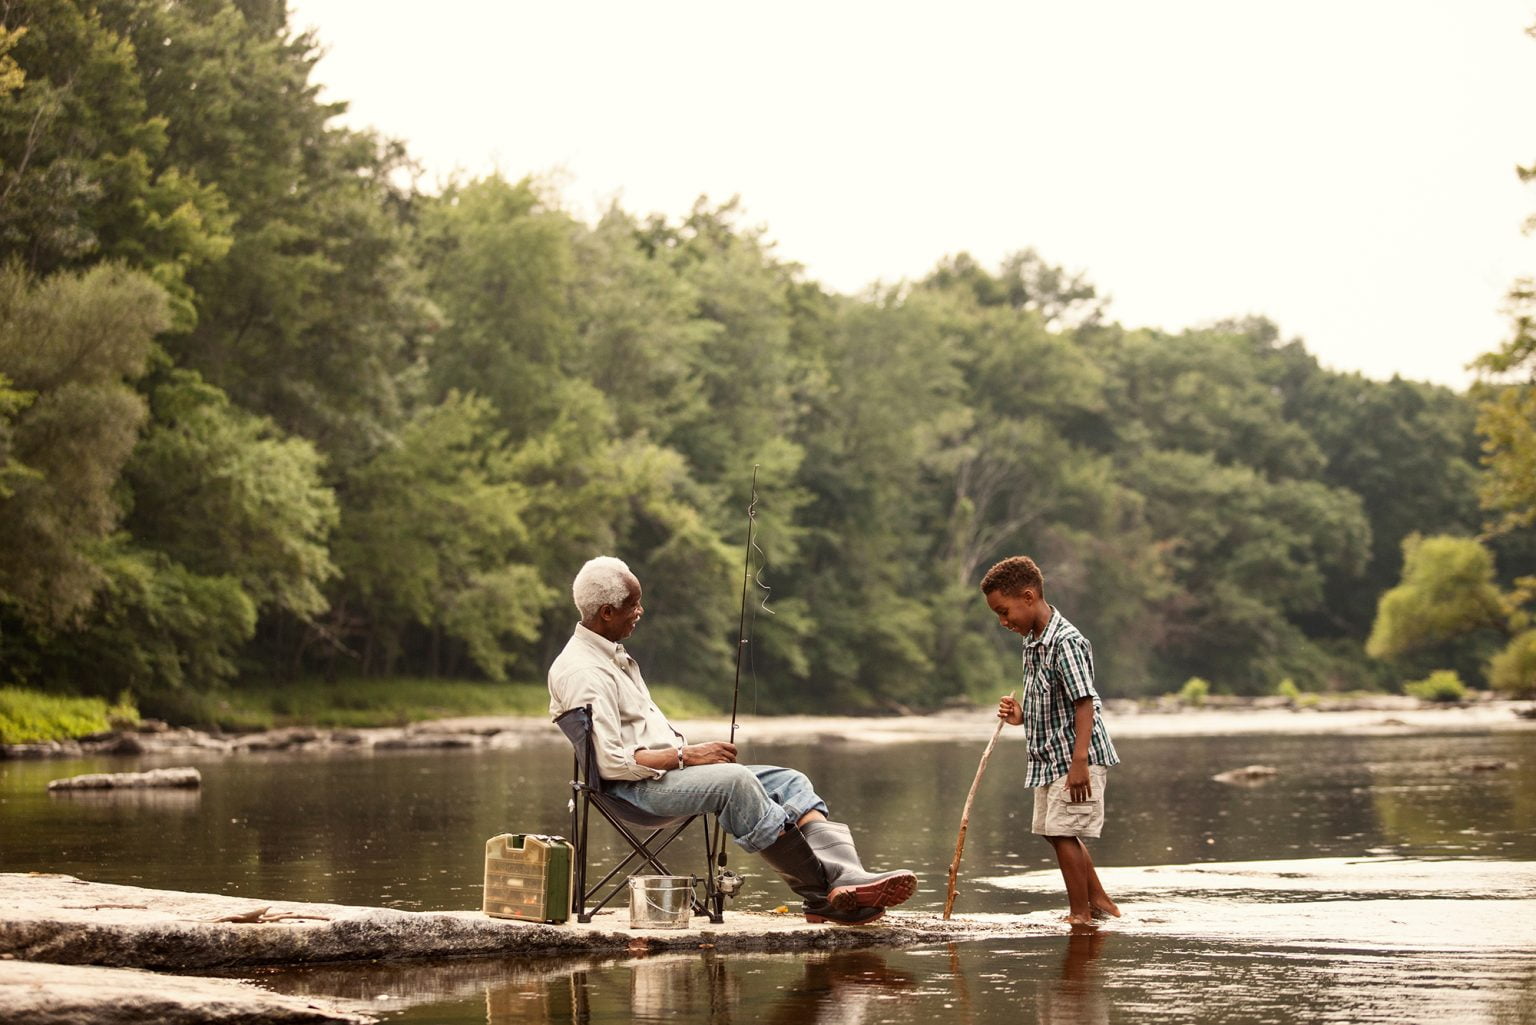 Boy (6-7) fishing with senior man by river